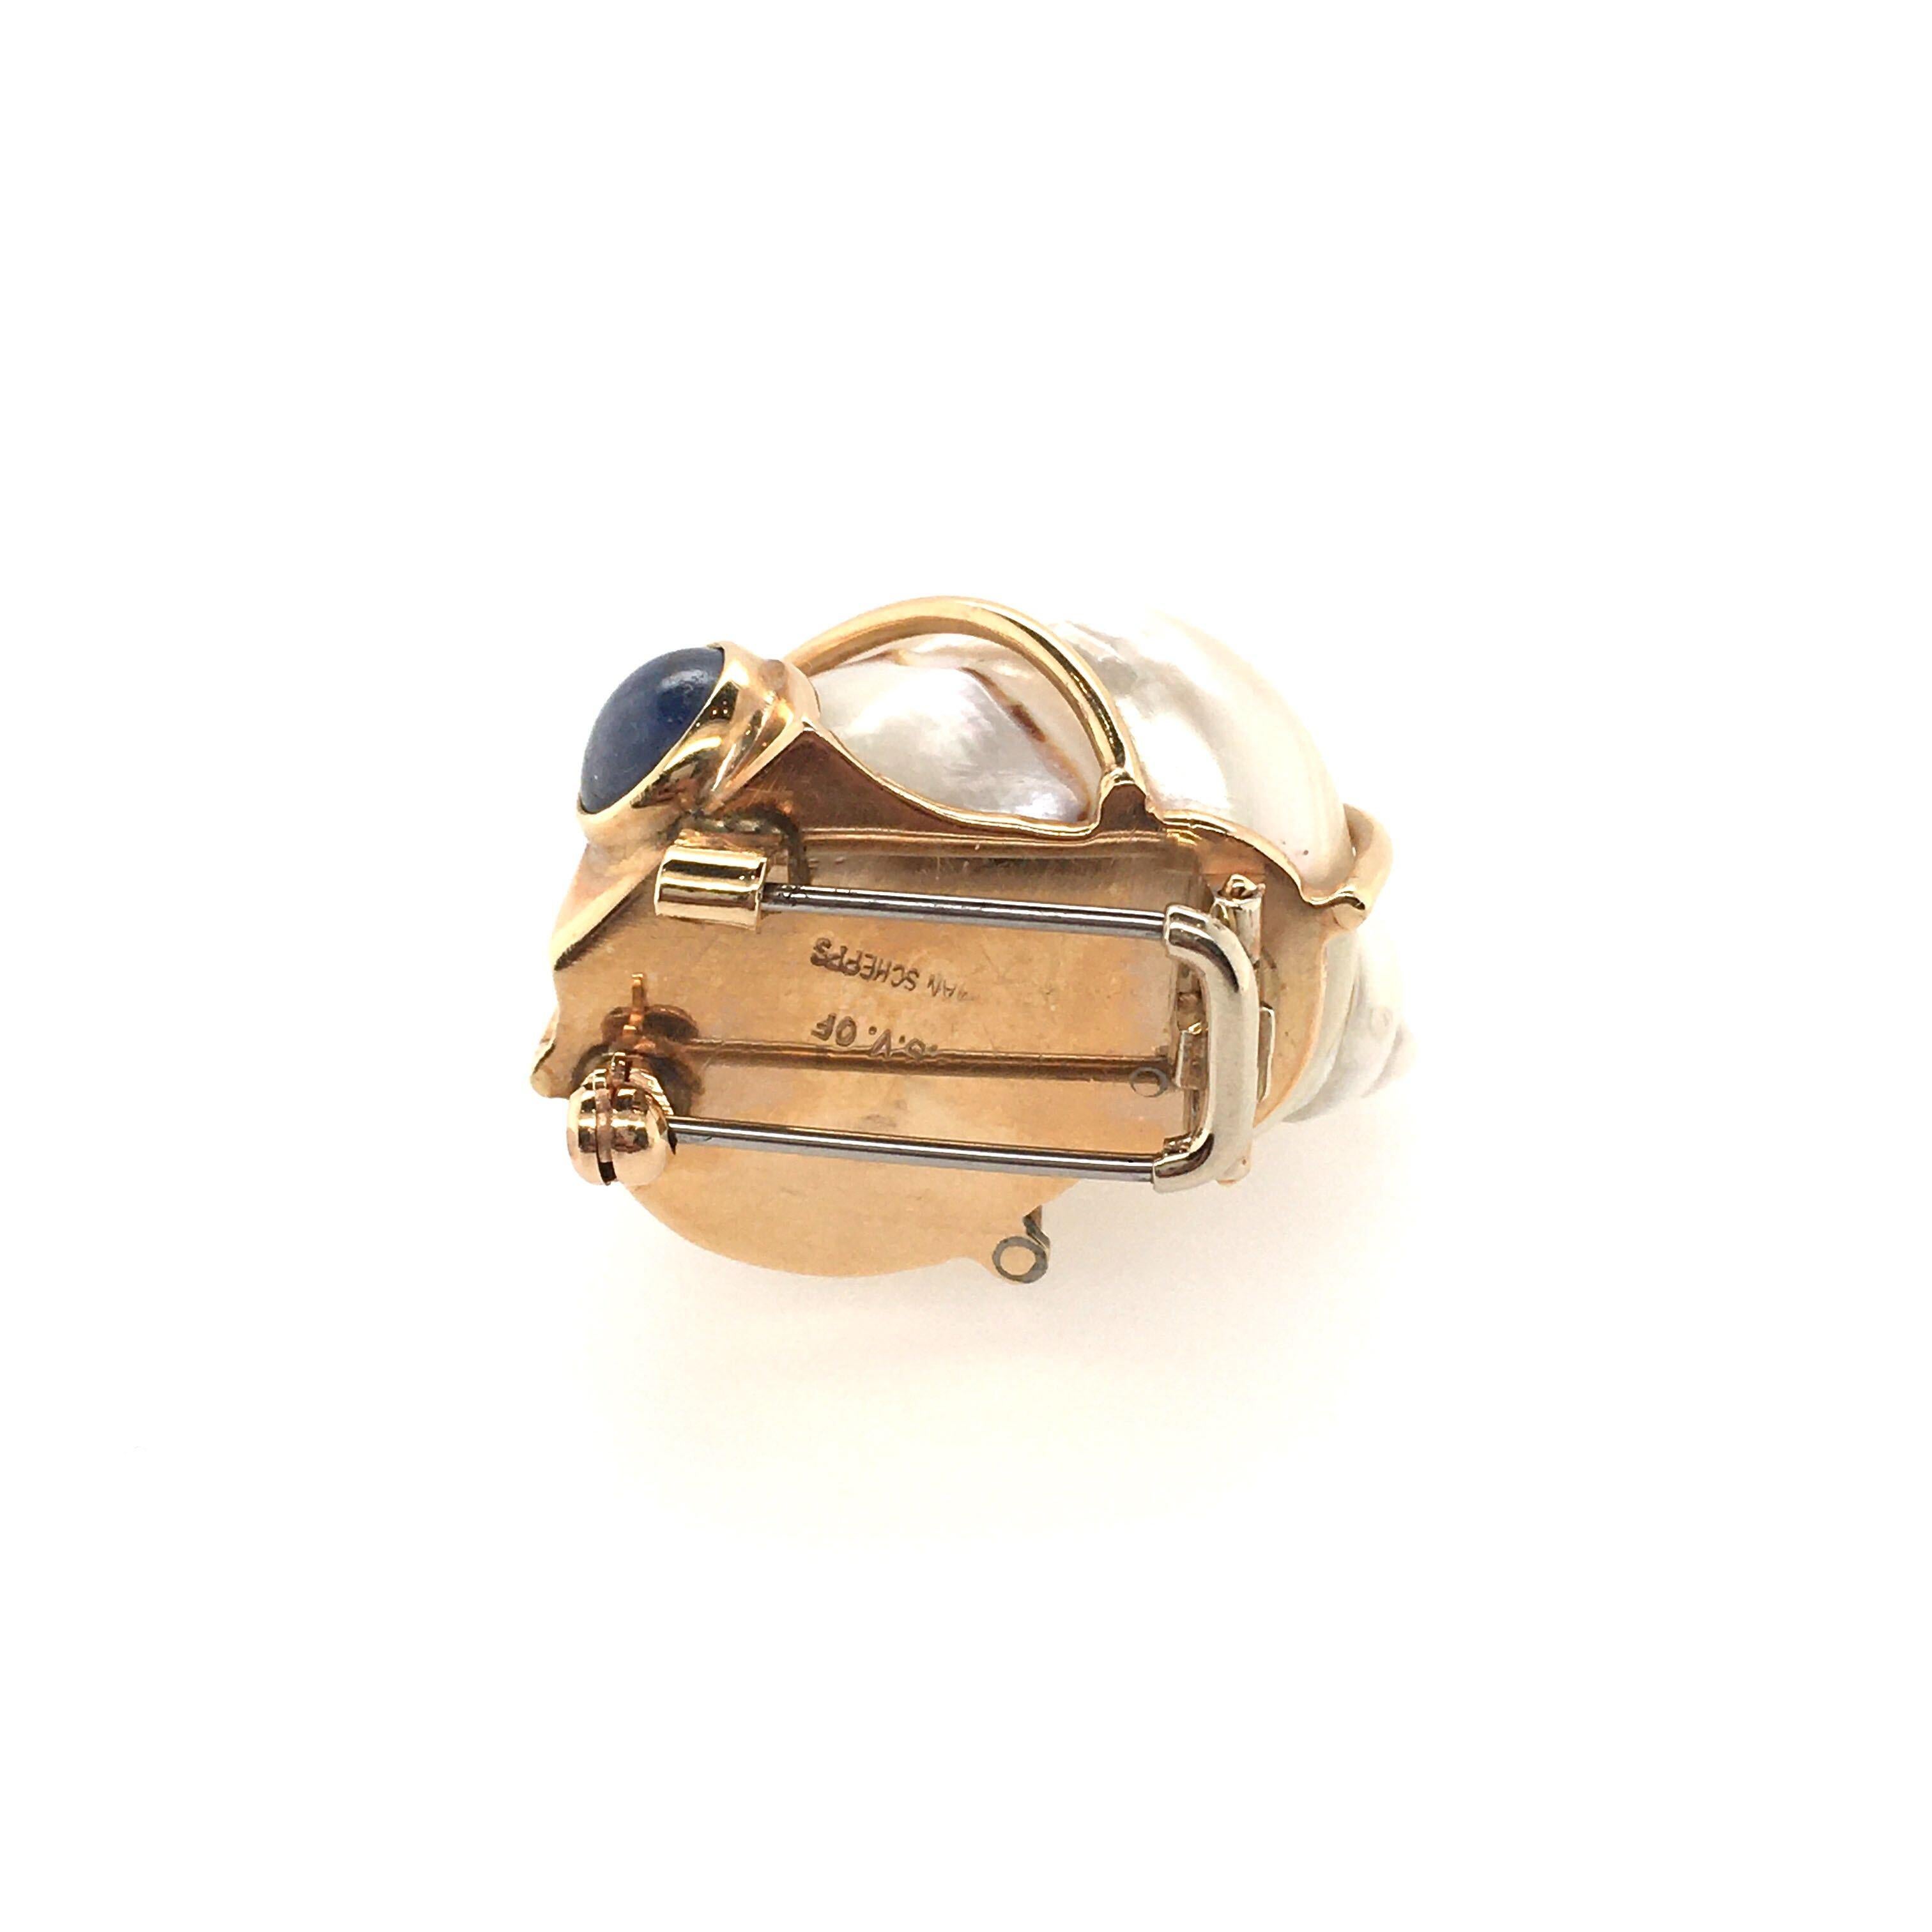 A 14 karat yellow gold , turbo shell and sapphire brooch. Patricia Schepps Vail for Seaman Schepps. Circa 1975. Set with a white turbo shell, wrapped in yellow gold wire, enhanced at each end by a cabochon sapphire. Length is approximately 1 1/4